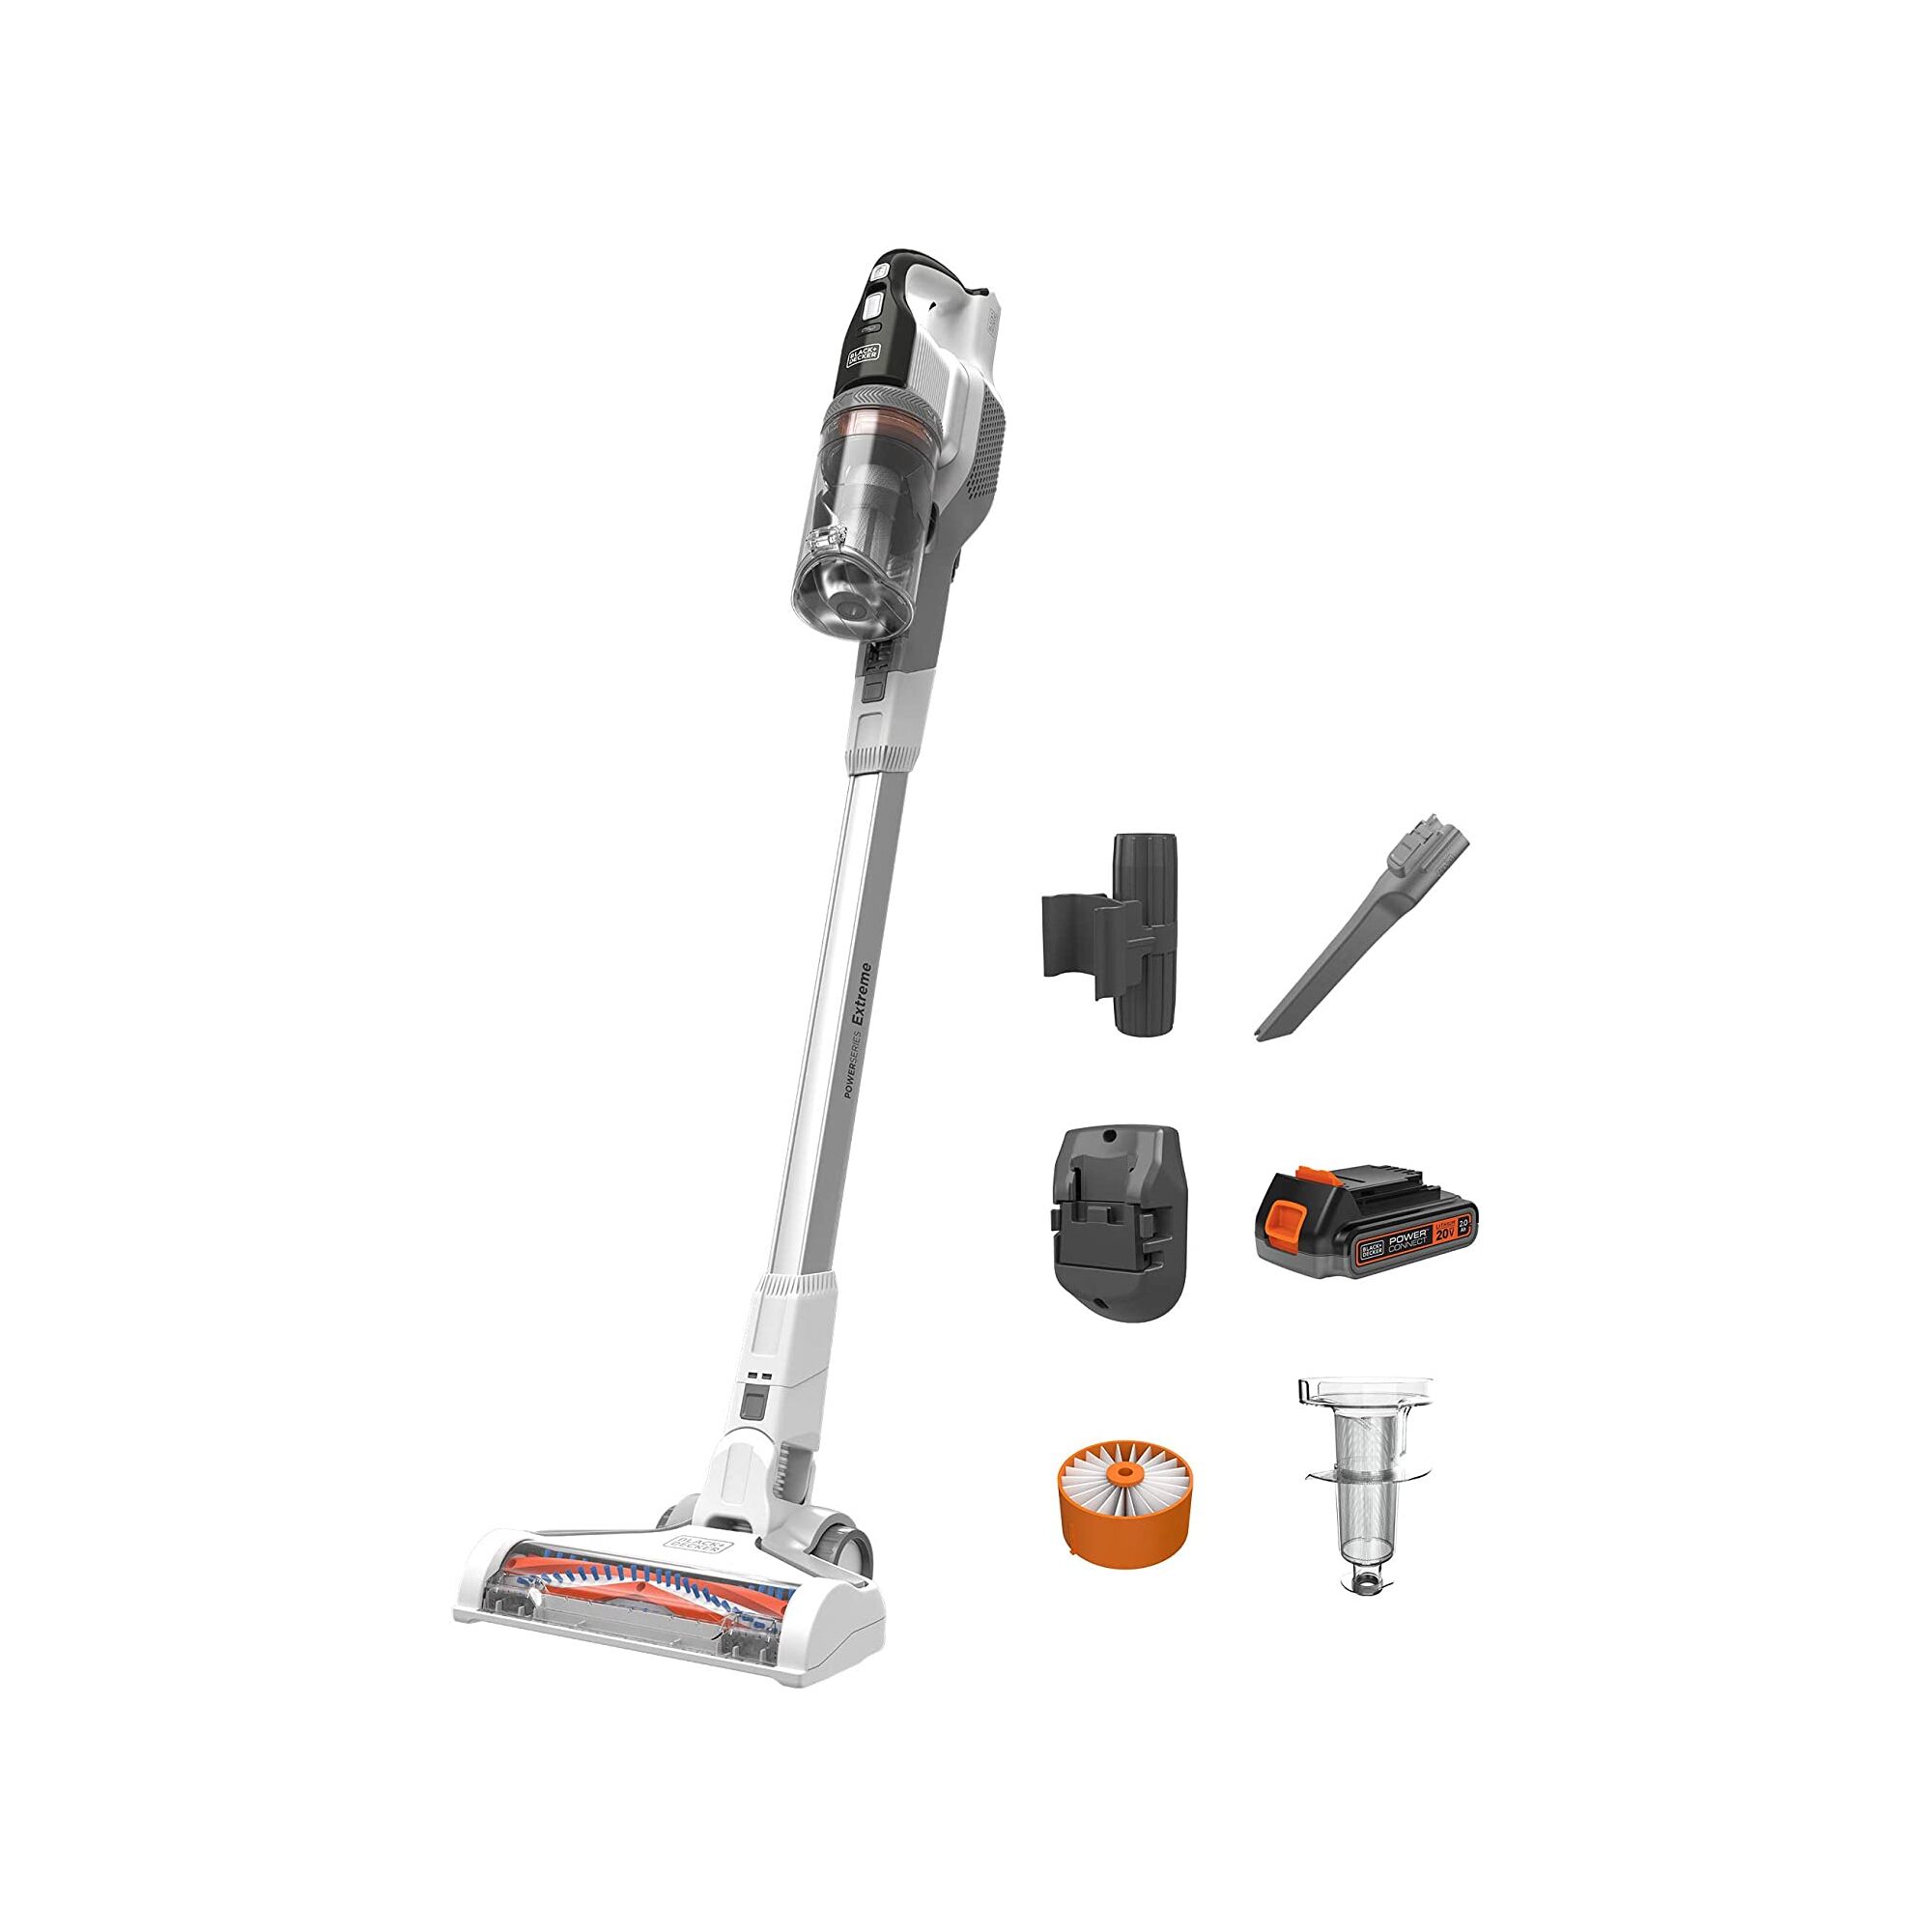 Profile of Power series extreme 20 volt max stick vacuum with accessories